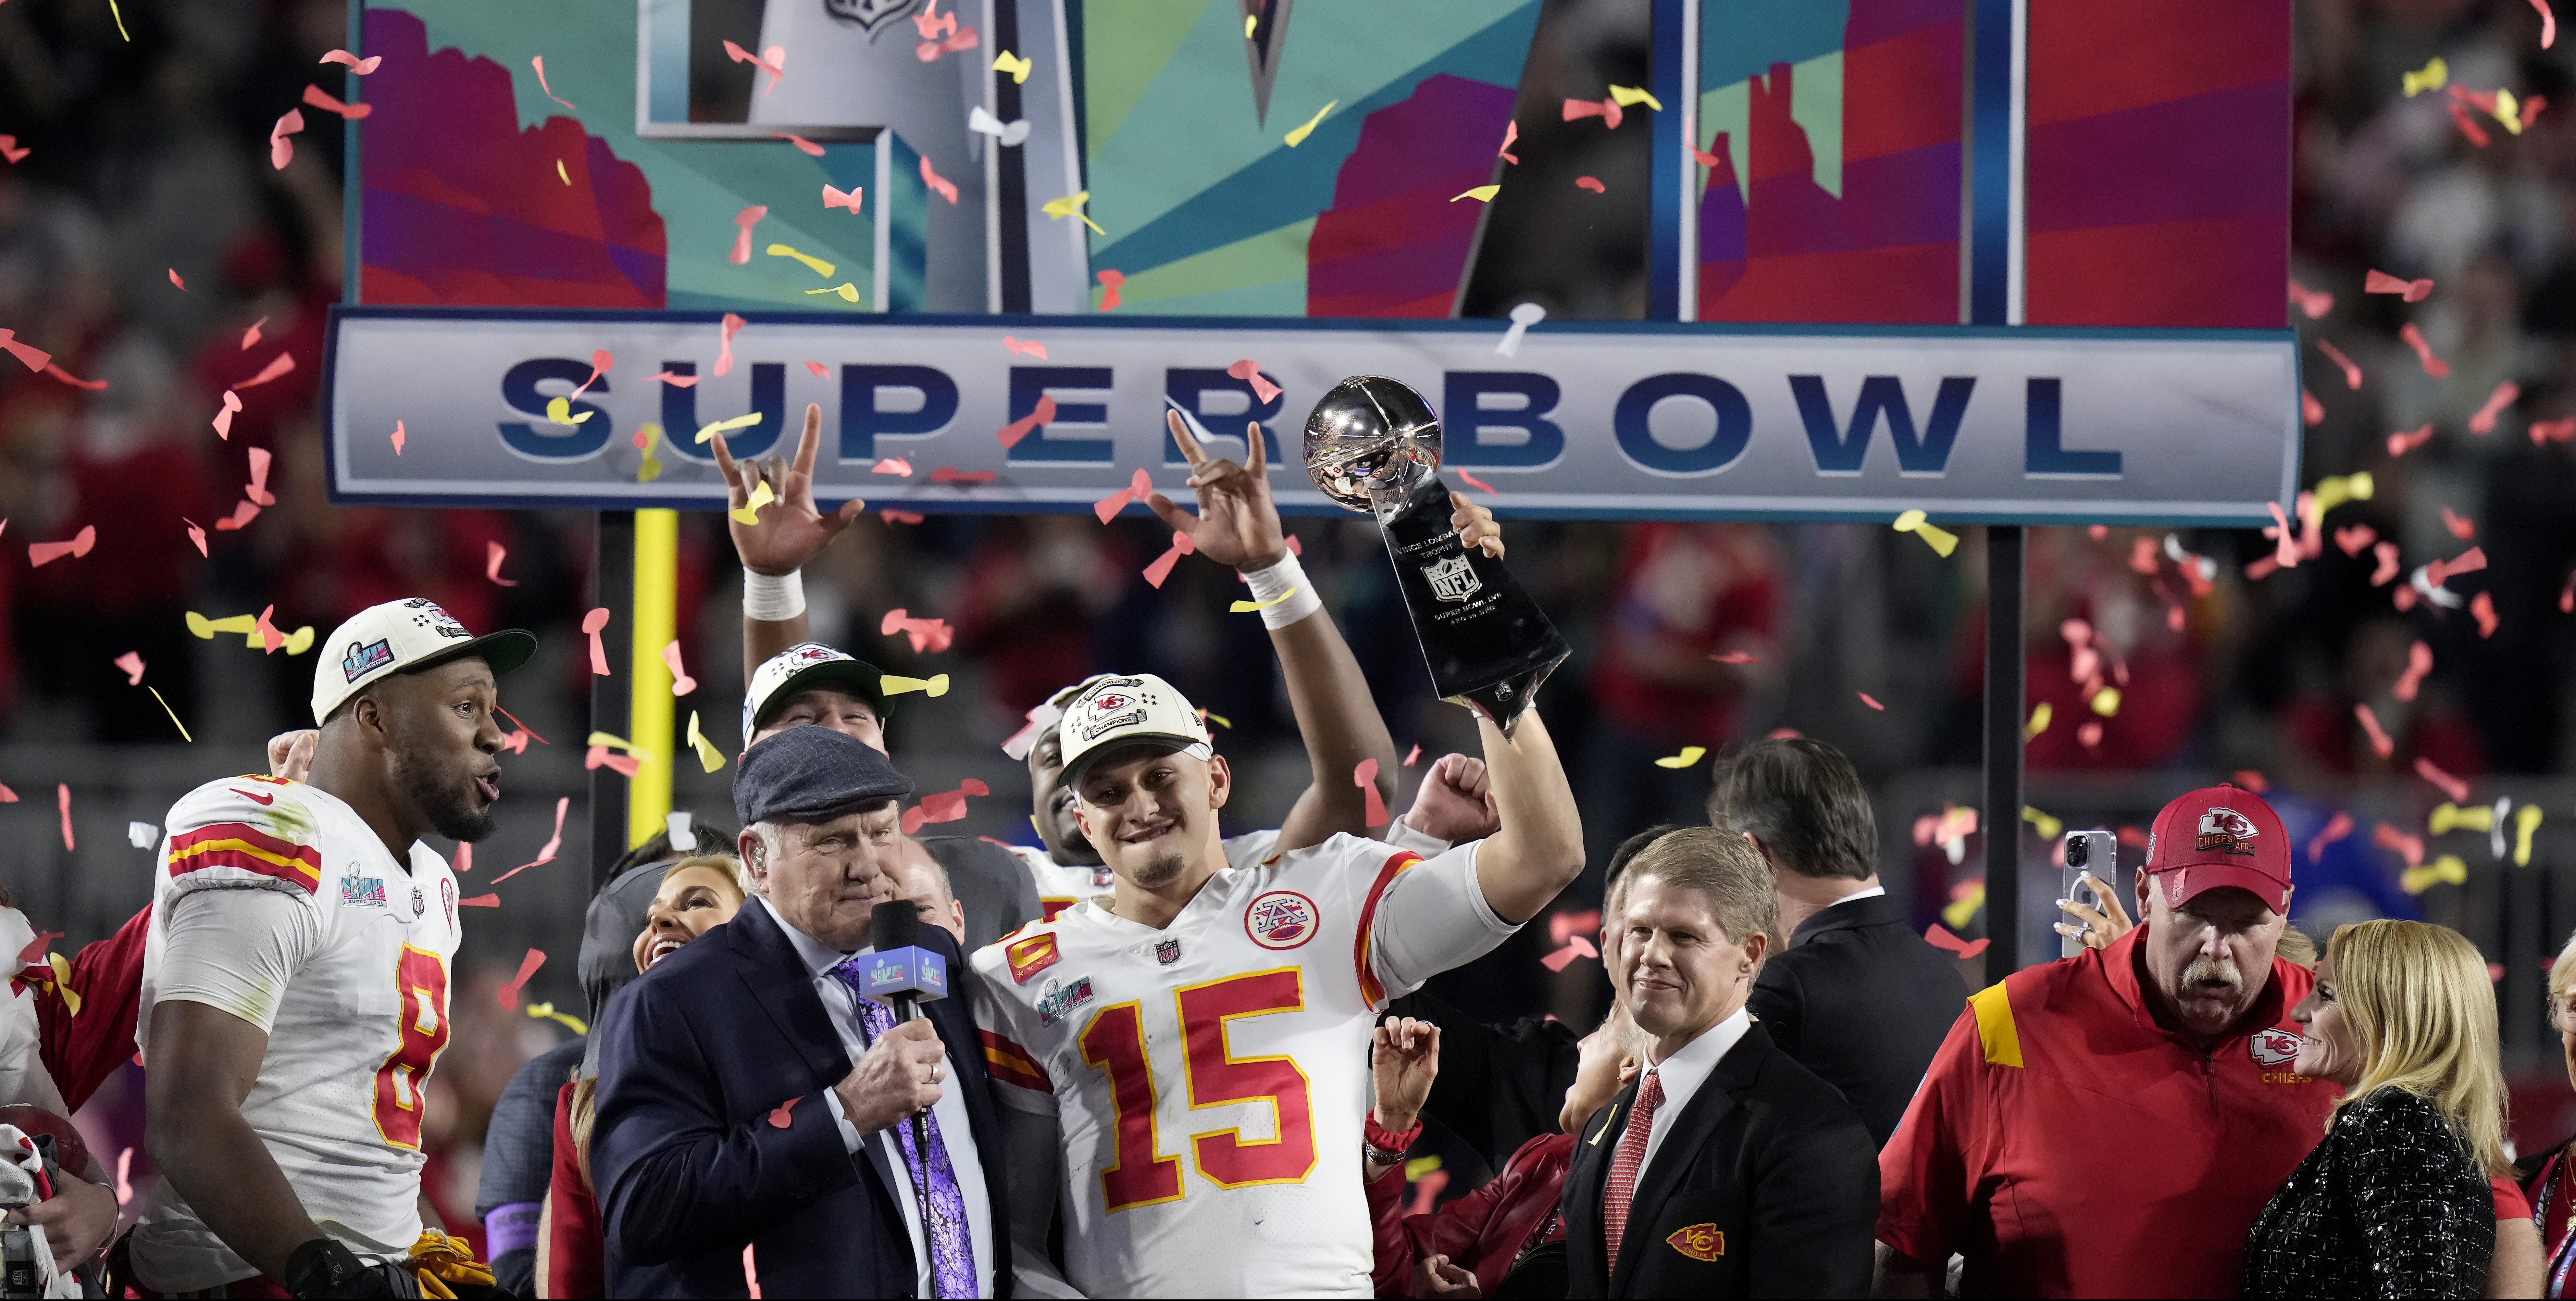 Super Bowl LVII Averages 113 Million Viewers, 3rd-Most in History